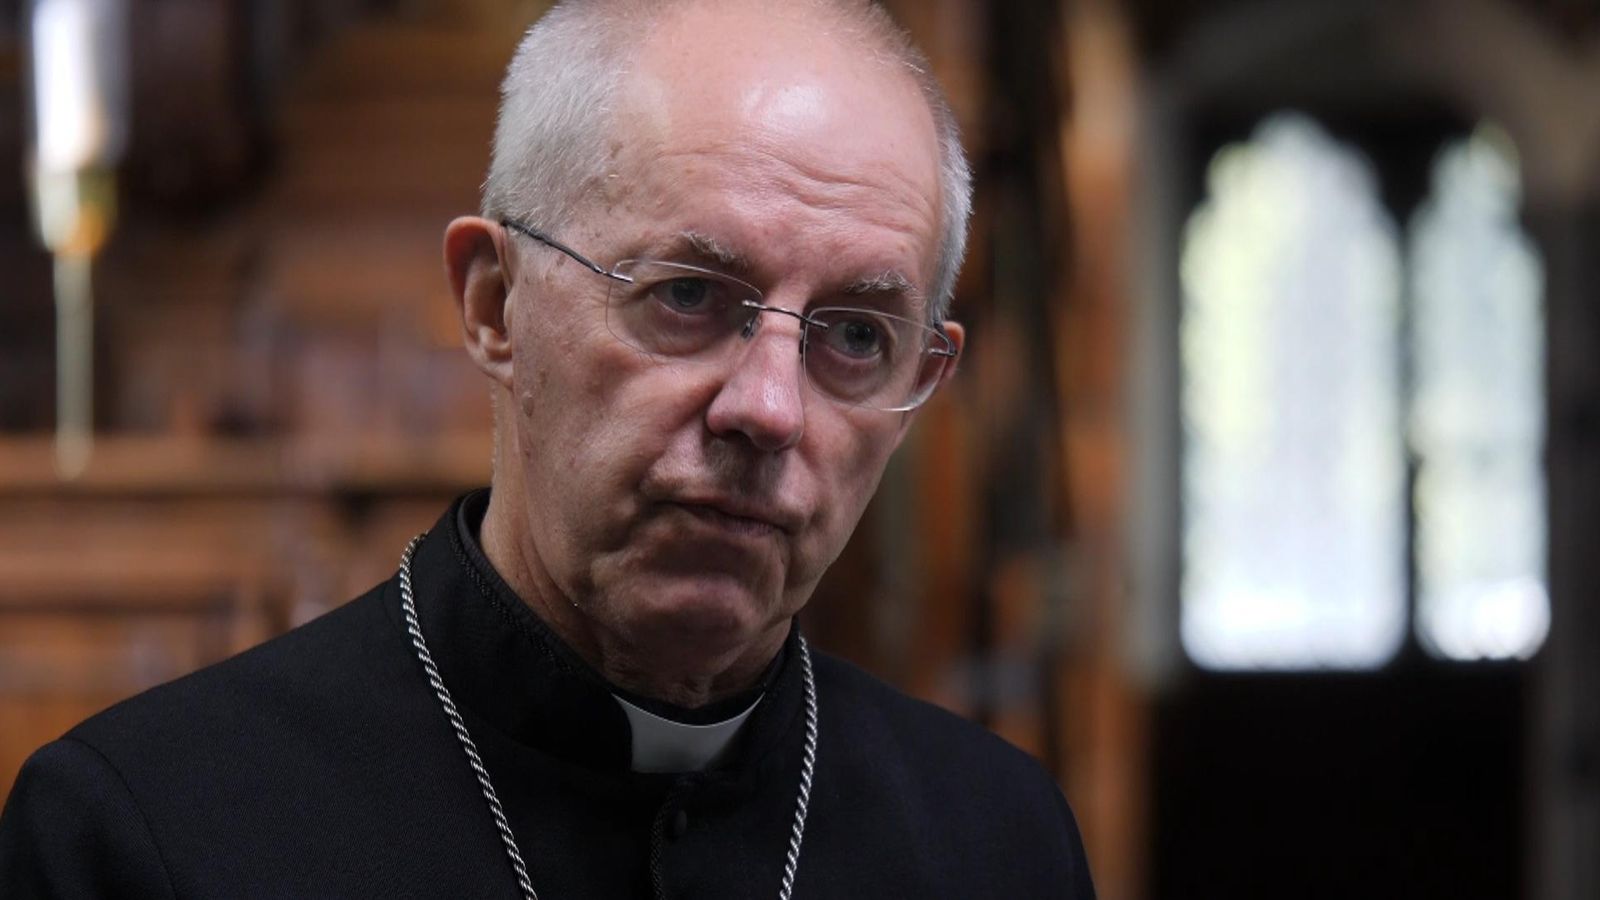 Church Of England Says No To Gay Marriage But Archbishop Of Canterbury Welcomes Blessings For